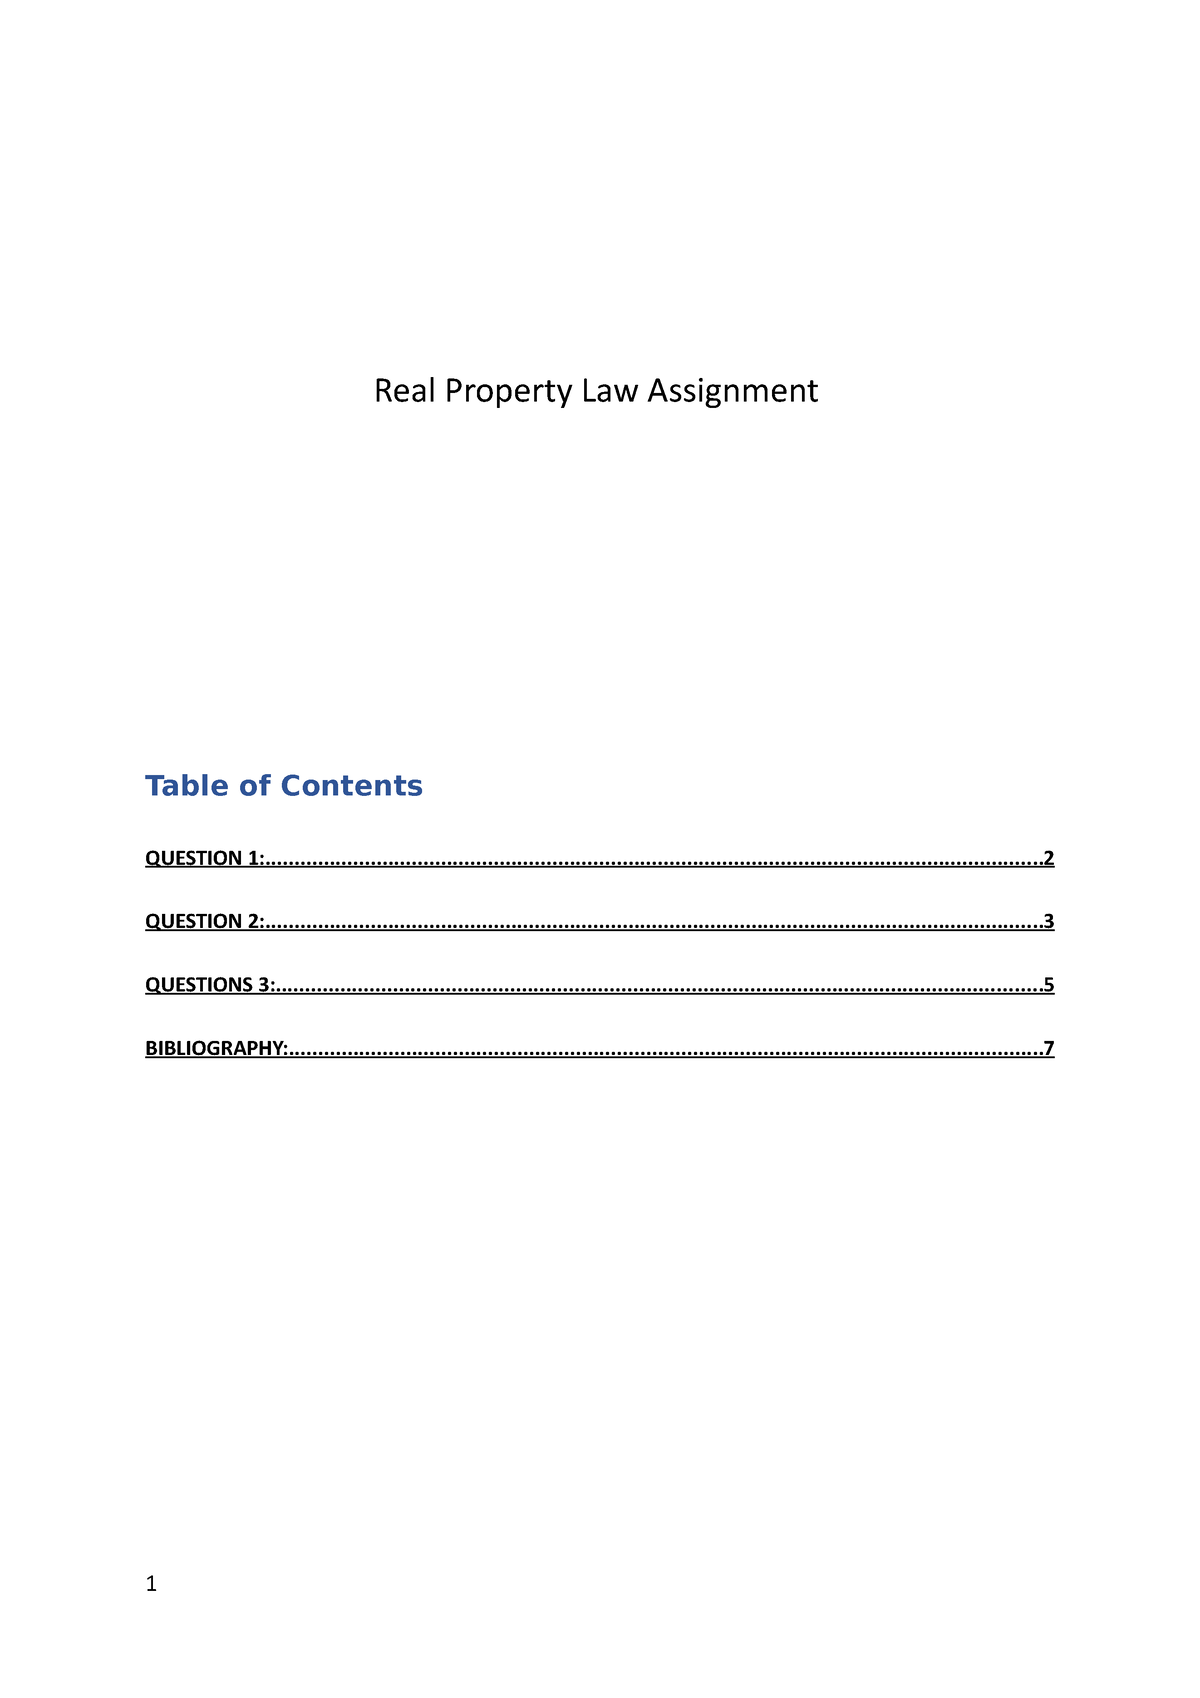 define assignment real property